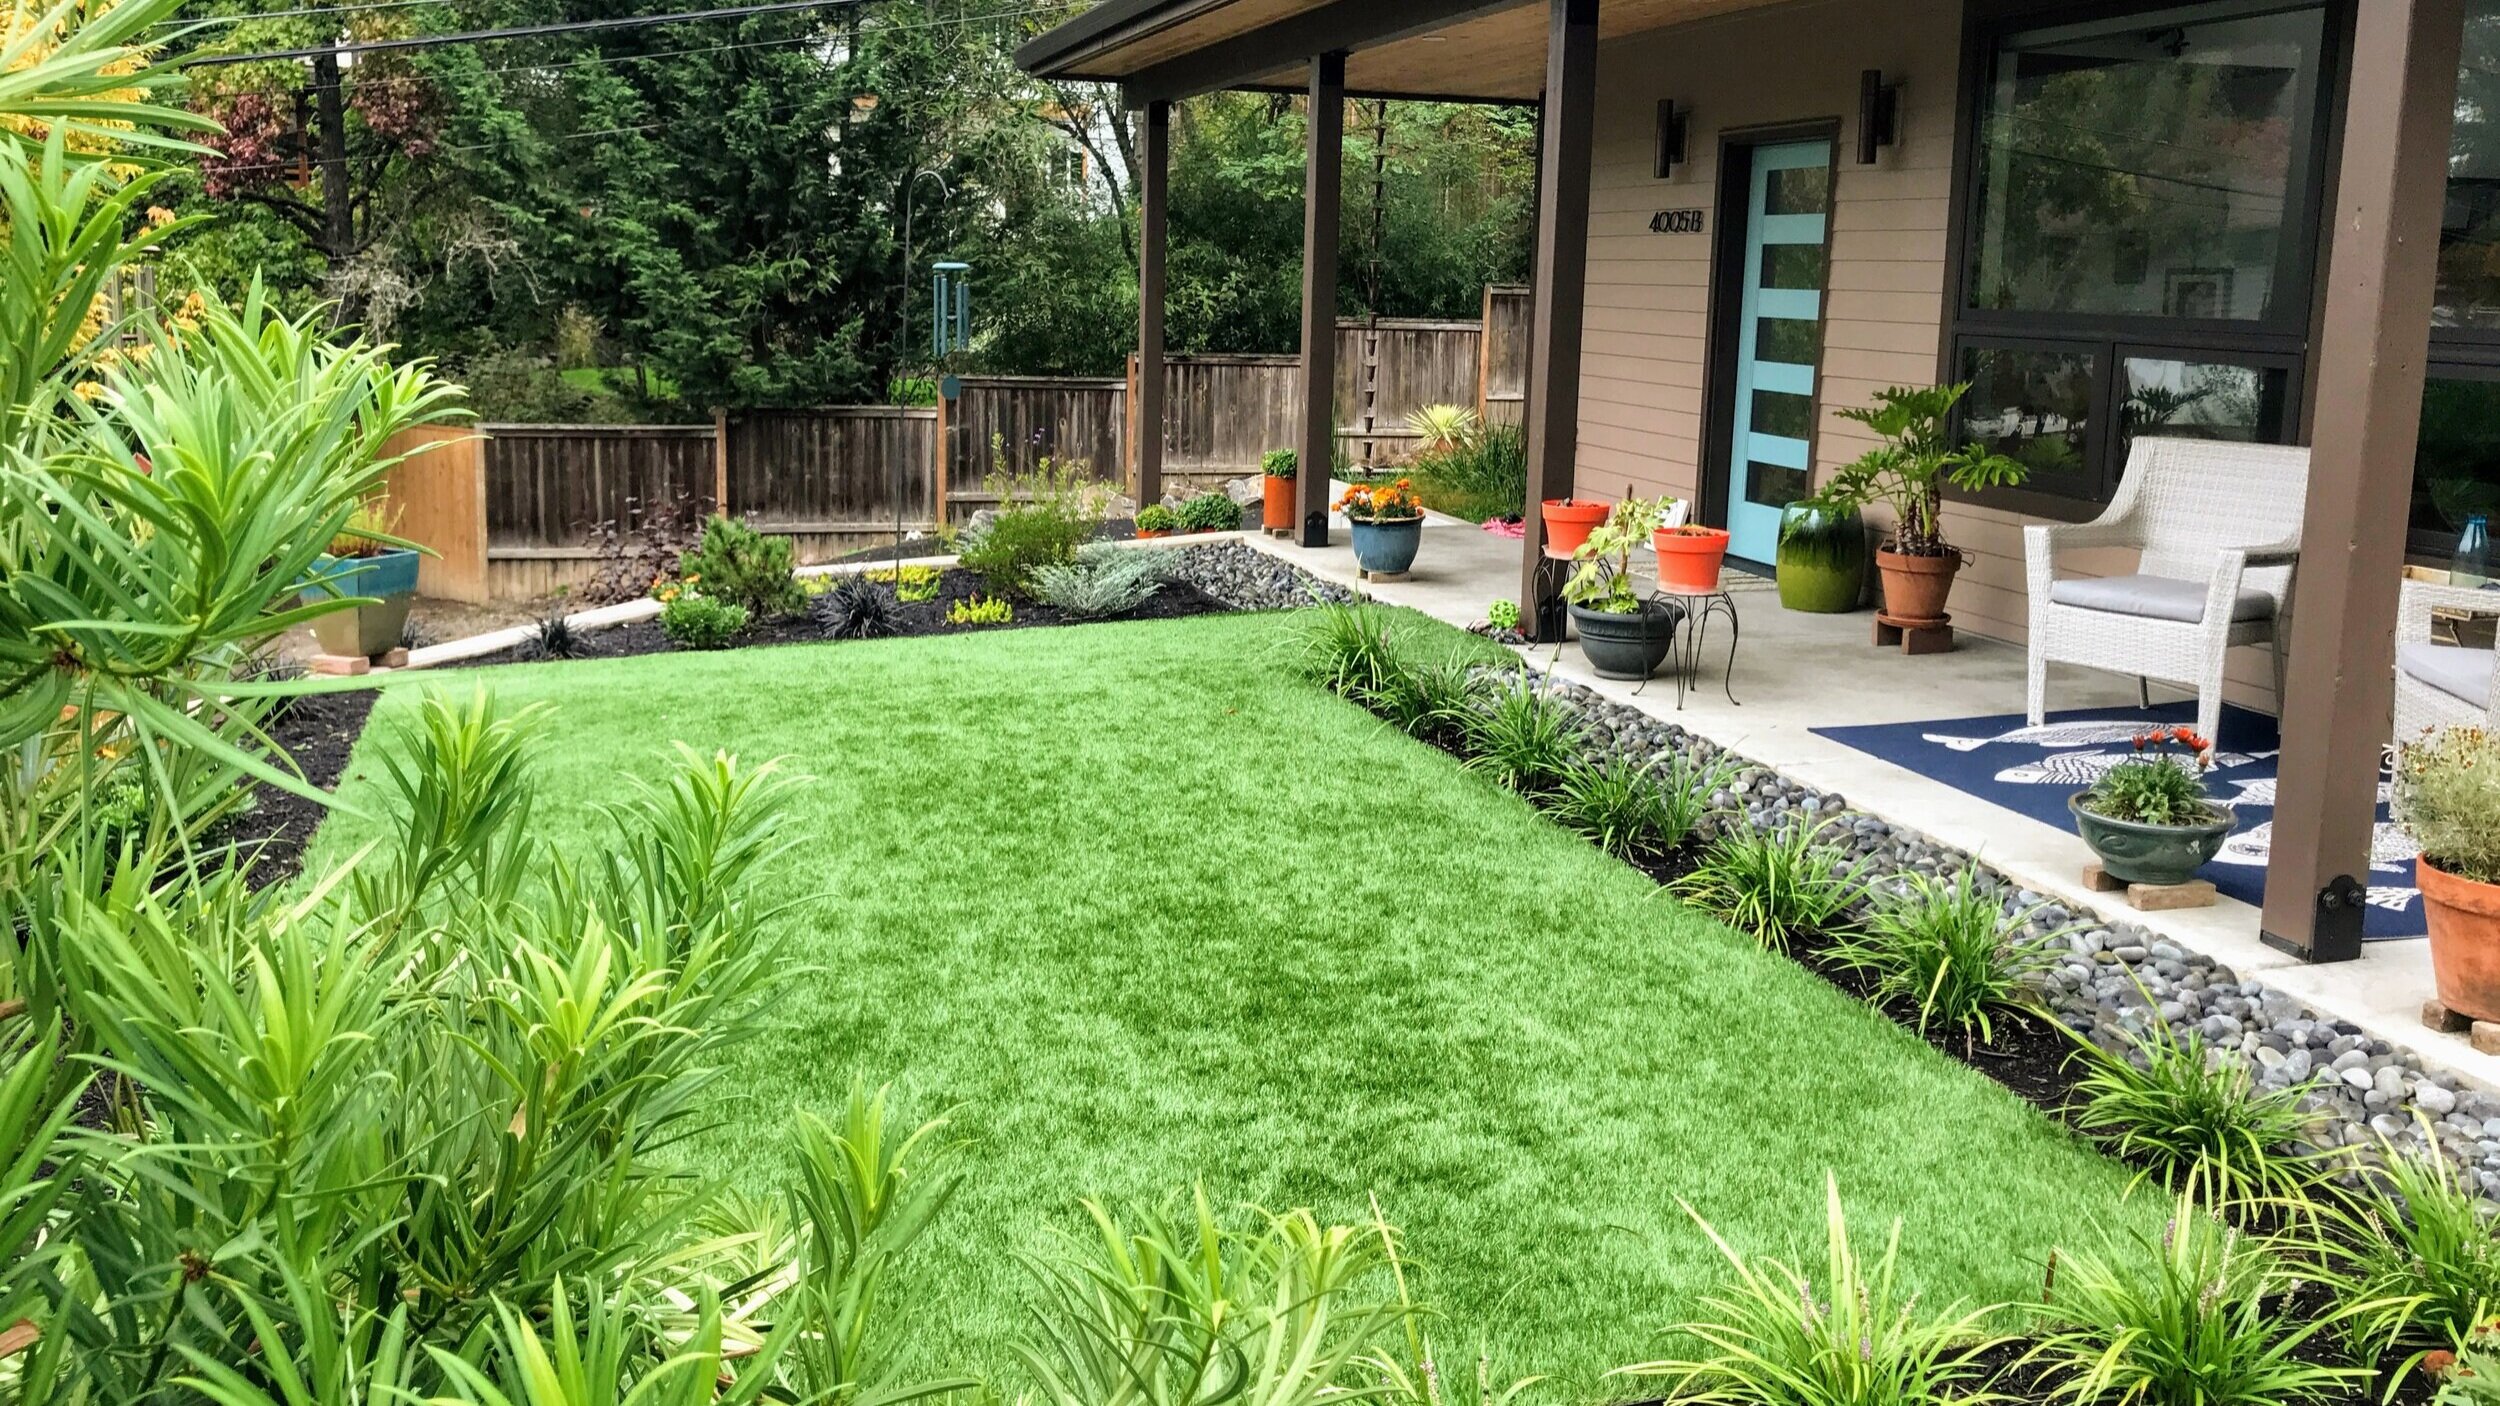 A Landscape Designer's 10 Reasons To Think Twice About Artificial Turf